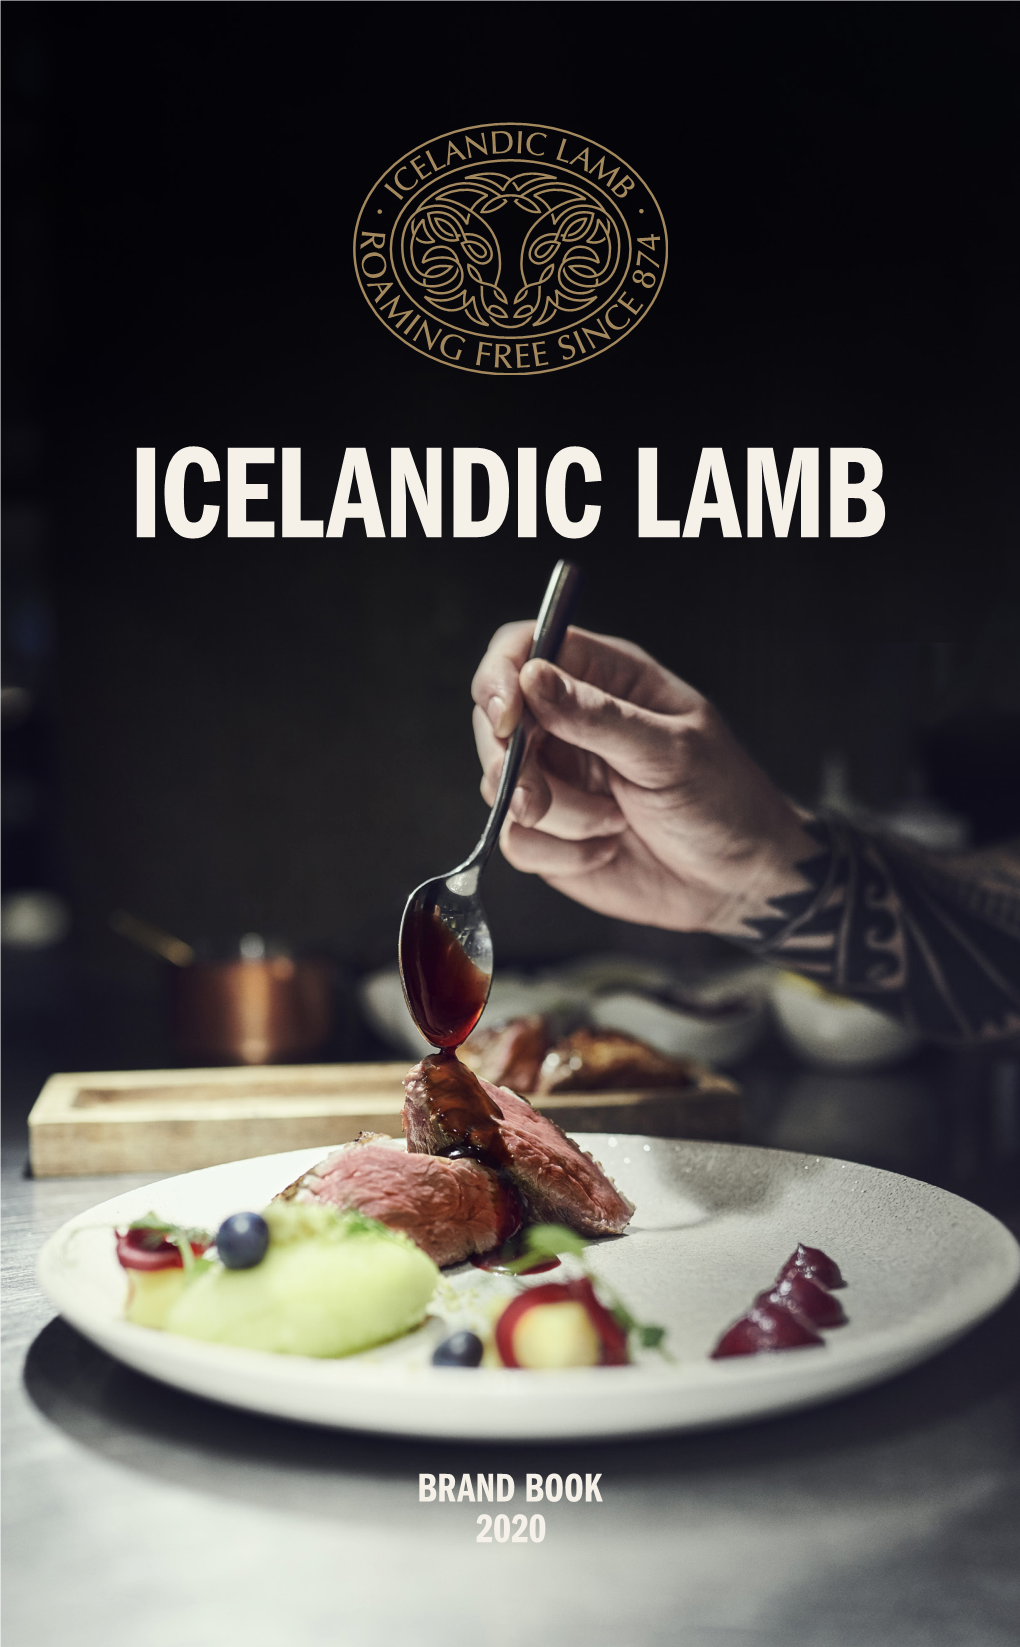 BRAND BOOK 2020 NATURALLY DELICIOUS Icelandic Lamb Builds on More Than 1,100 Years of Sustainable Sheep-Farming Tradition